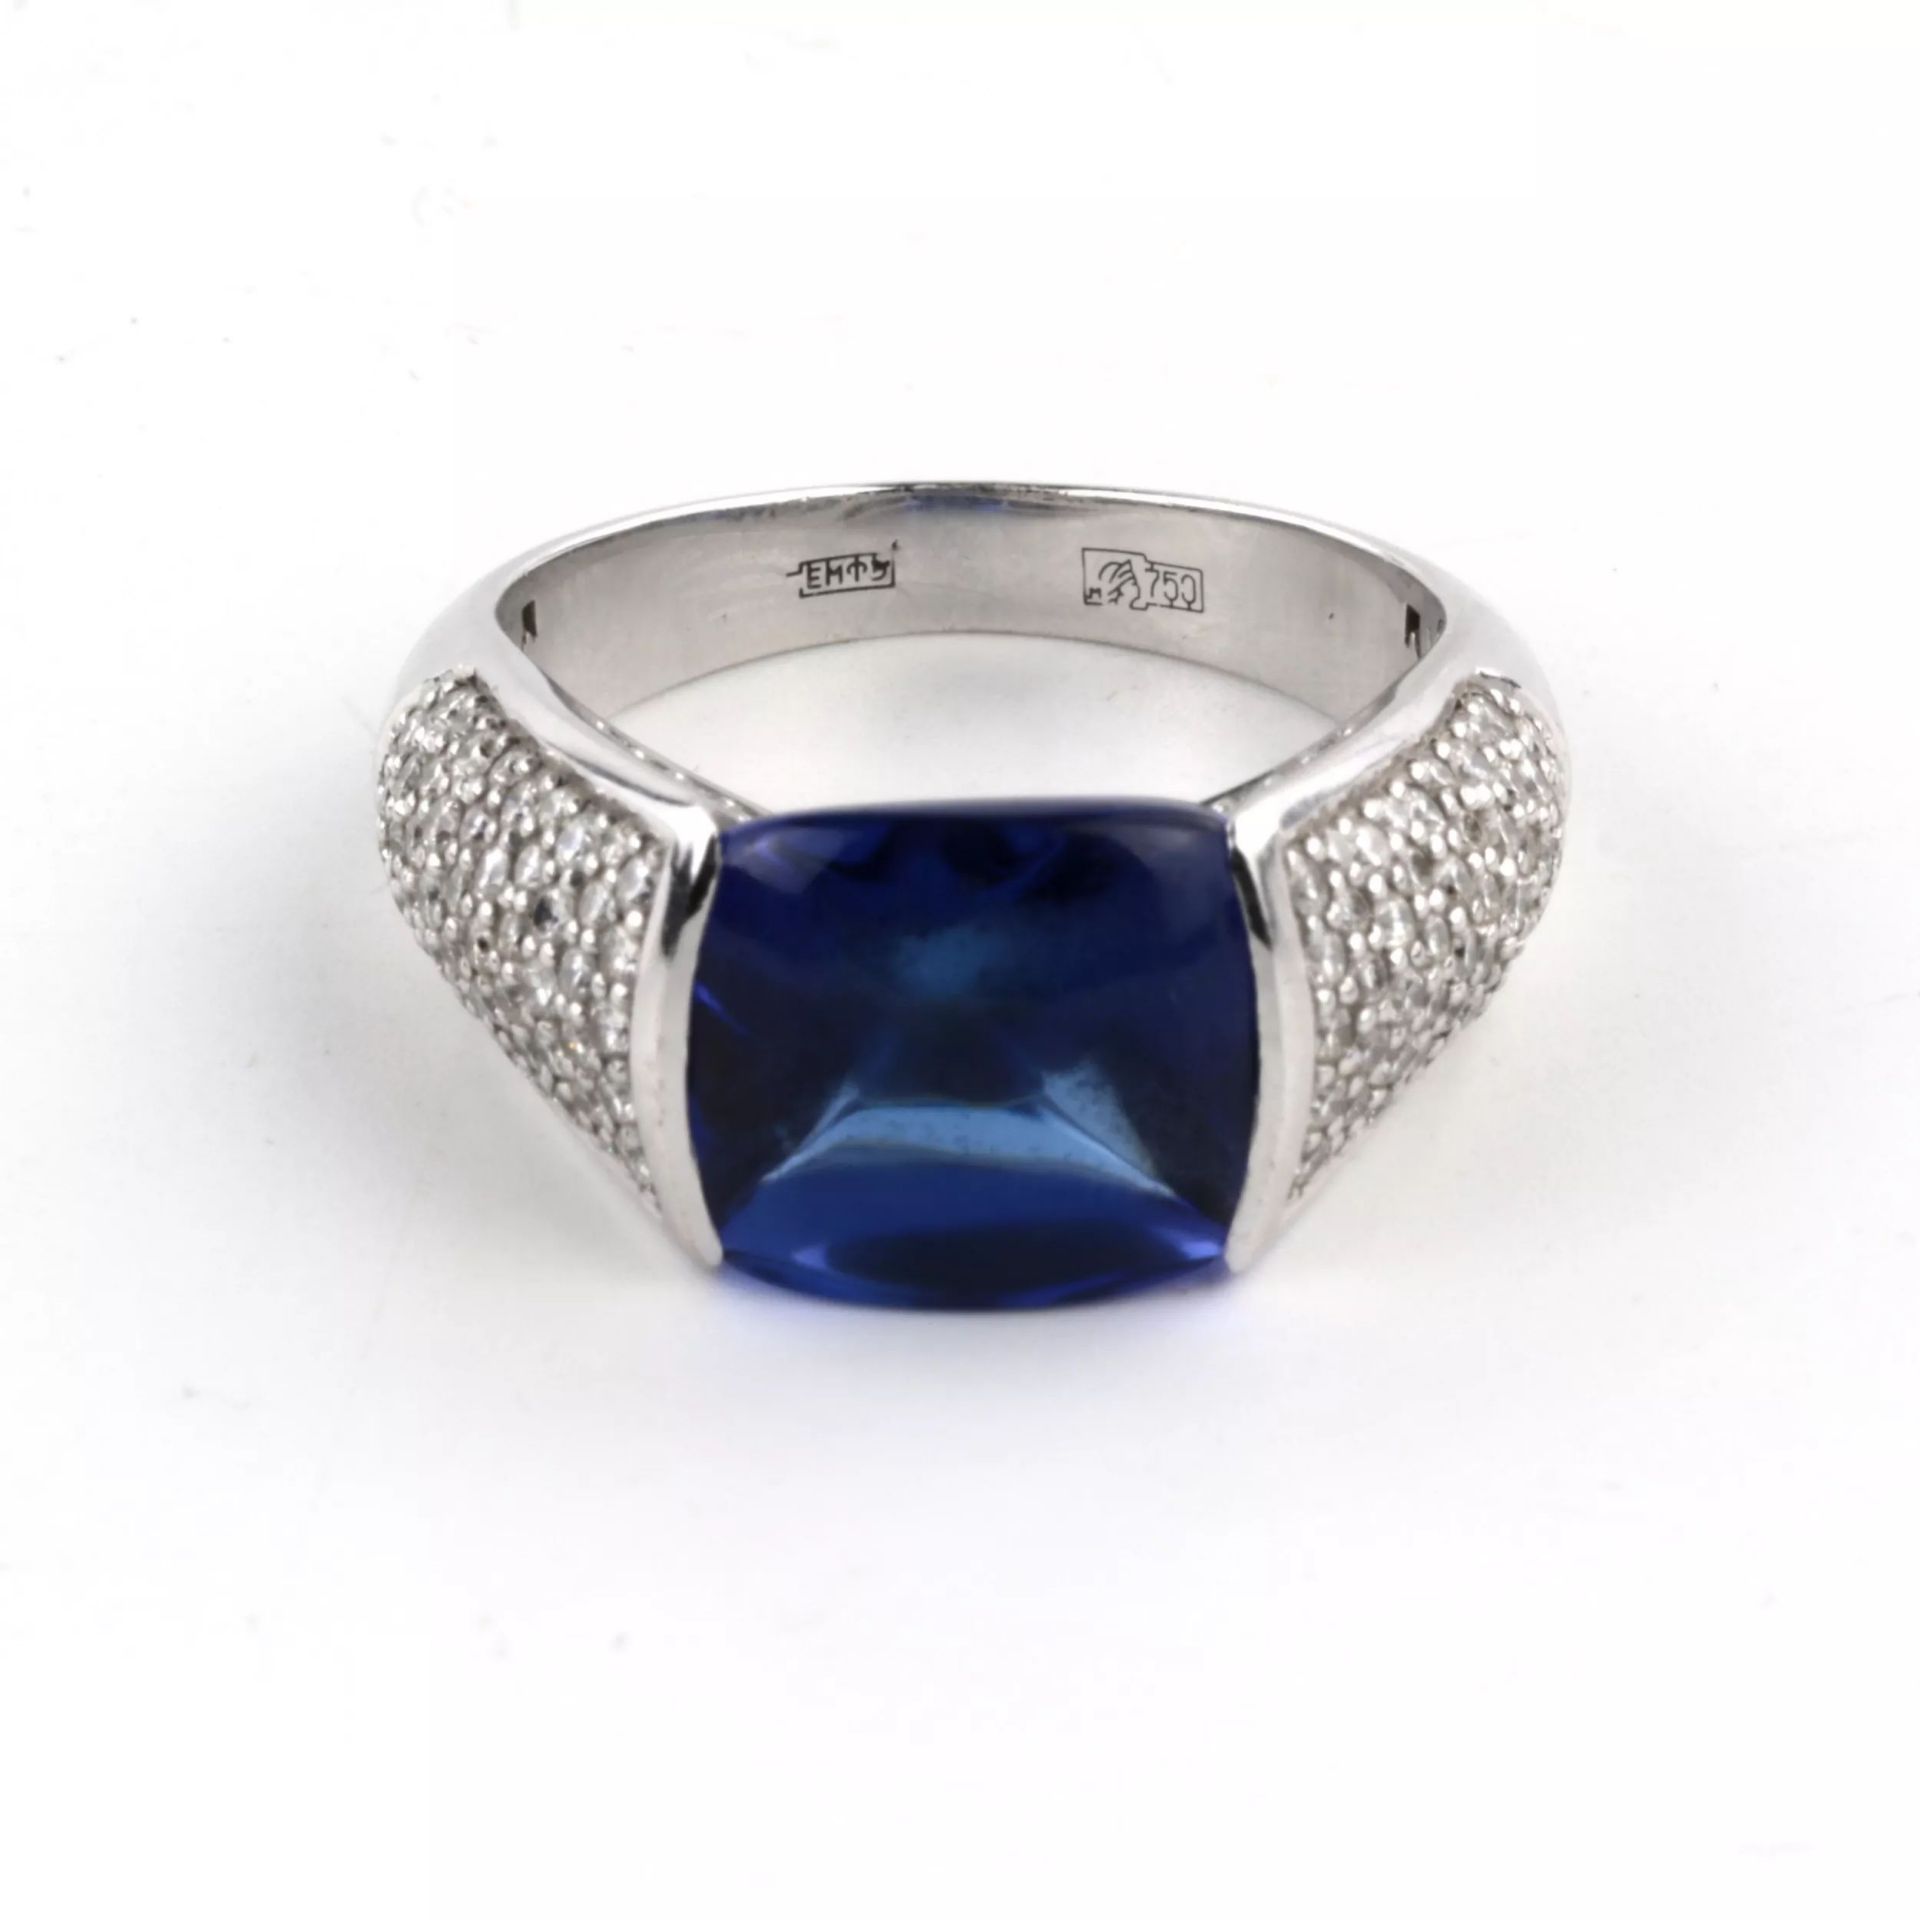 18K white gold ring with diamonds and tanzanite. - Image 5 of 9